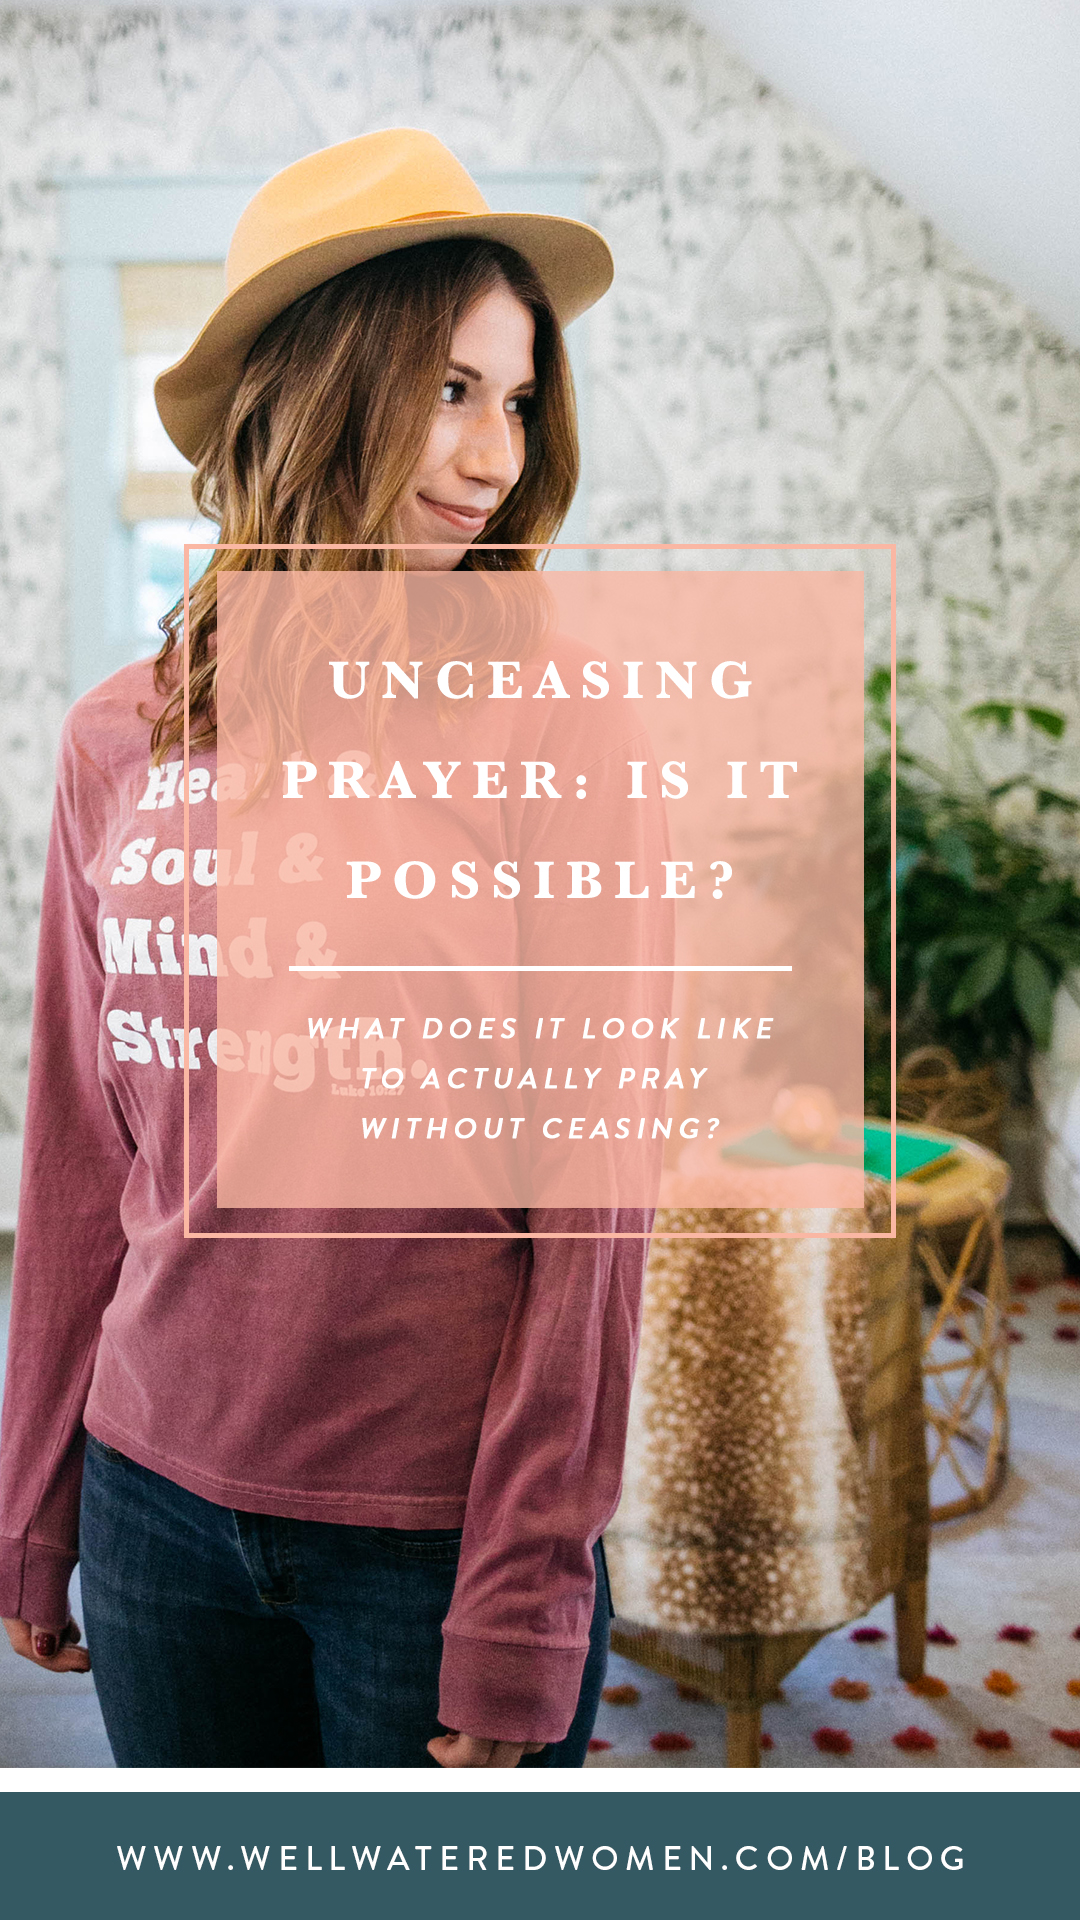 Unceasing Prayer: Is it possible? What does it look like to actually pray without ceasing?